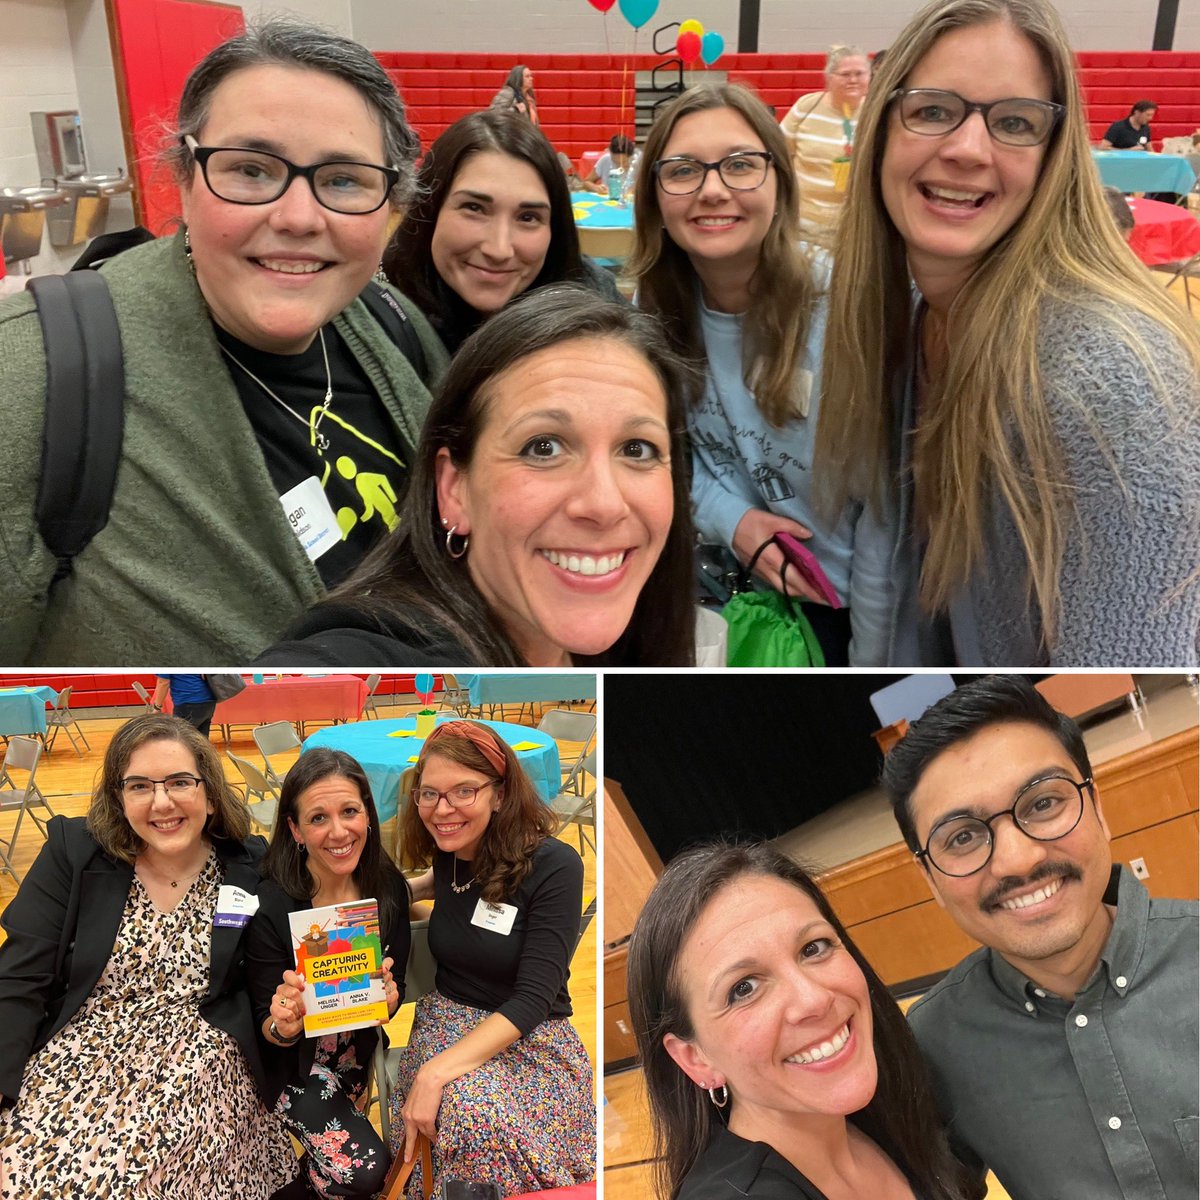 #frEDcamp was true @RemakeDays JOY! I am extremely BLESSED and HONORED to have worked w/@Tracyteach1, @greggbehr, @RyanRydzewski, @DrMillerASD & an AMAZING team of so many inspirational frEDucational leaders to offer this experience to so many #PAProudEducators!#When_You_Wonder❤️